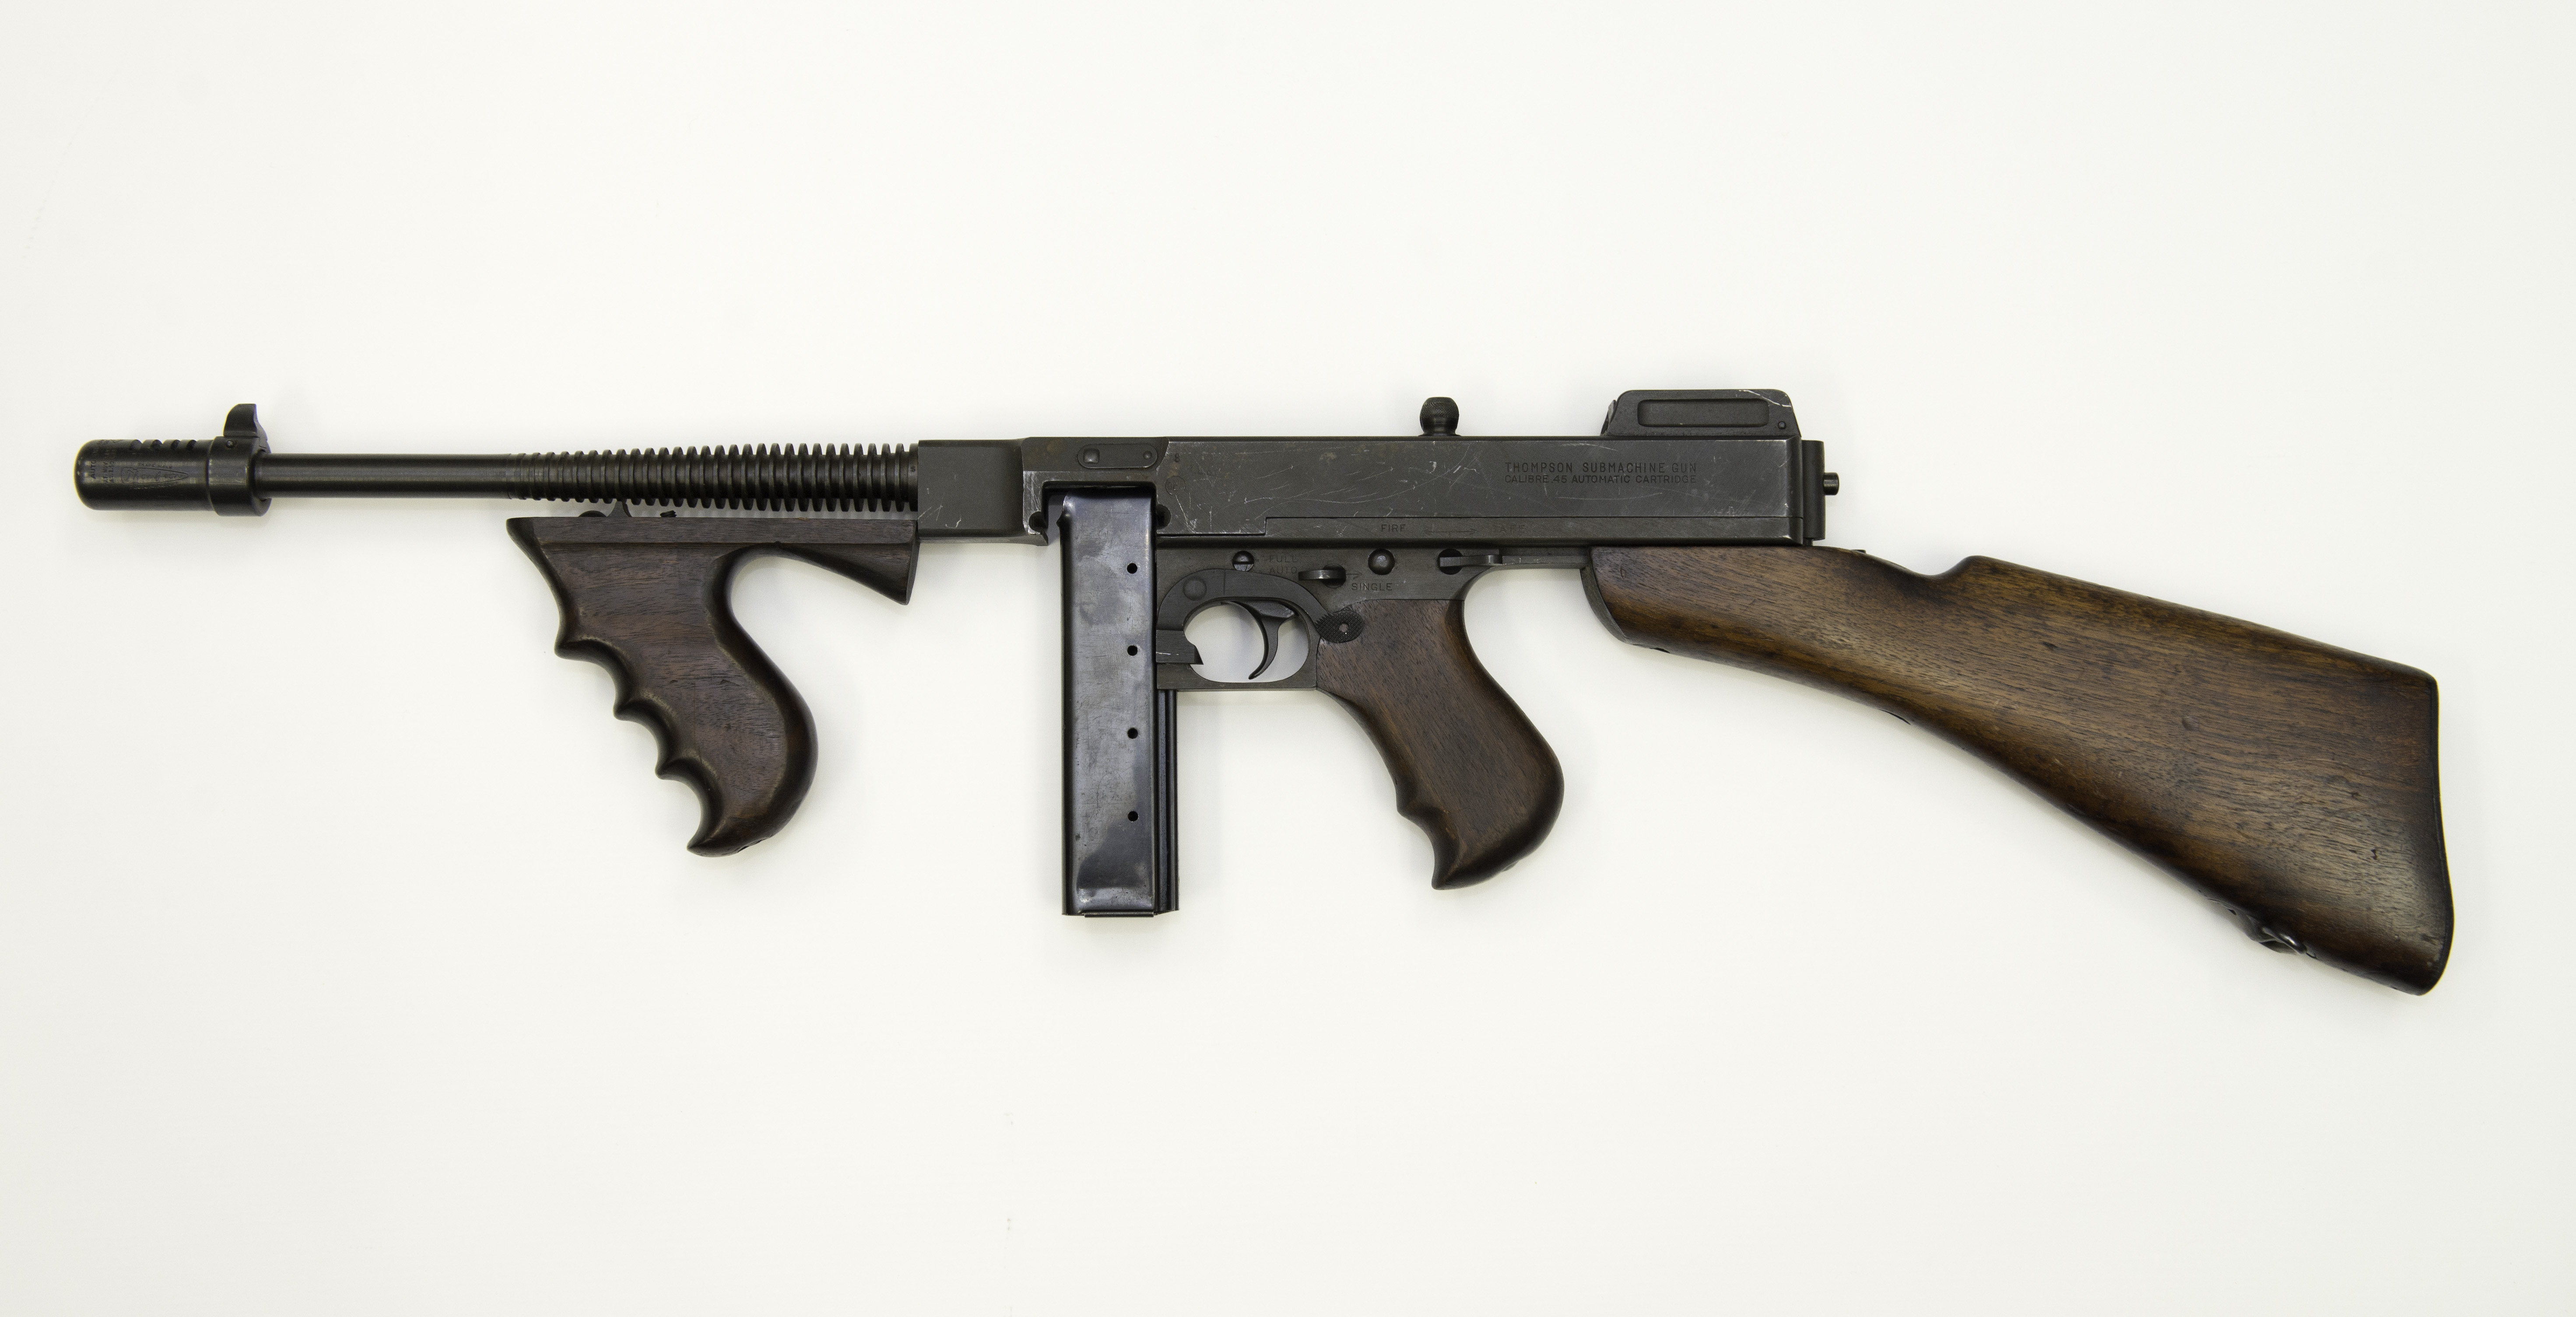 Photo of a reasonable facsimile of the stolen Tommy-gun